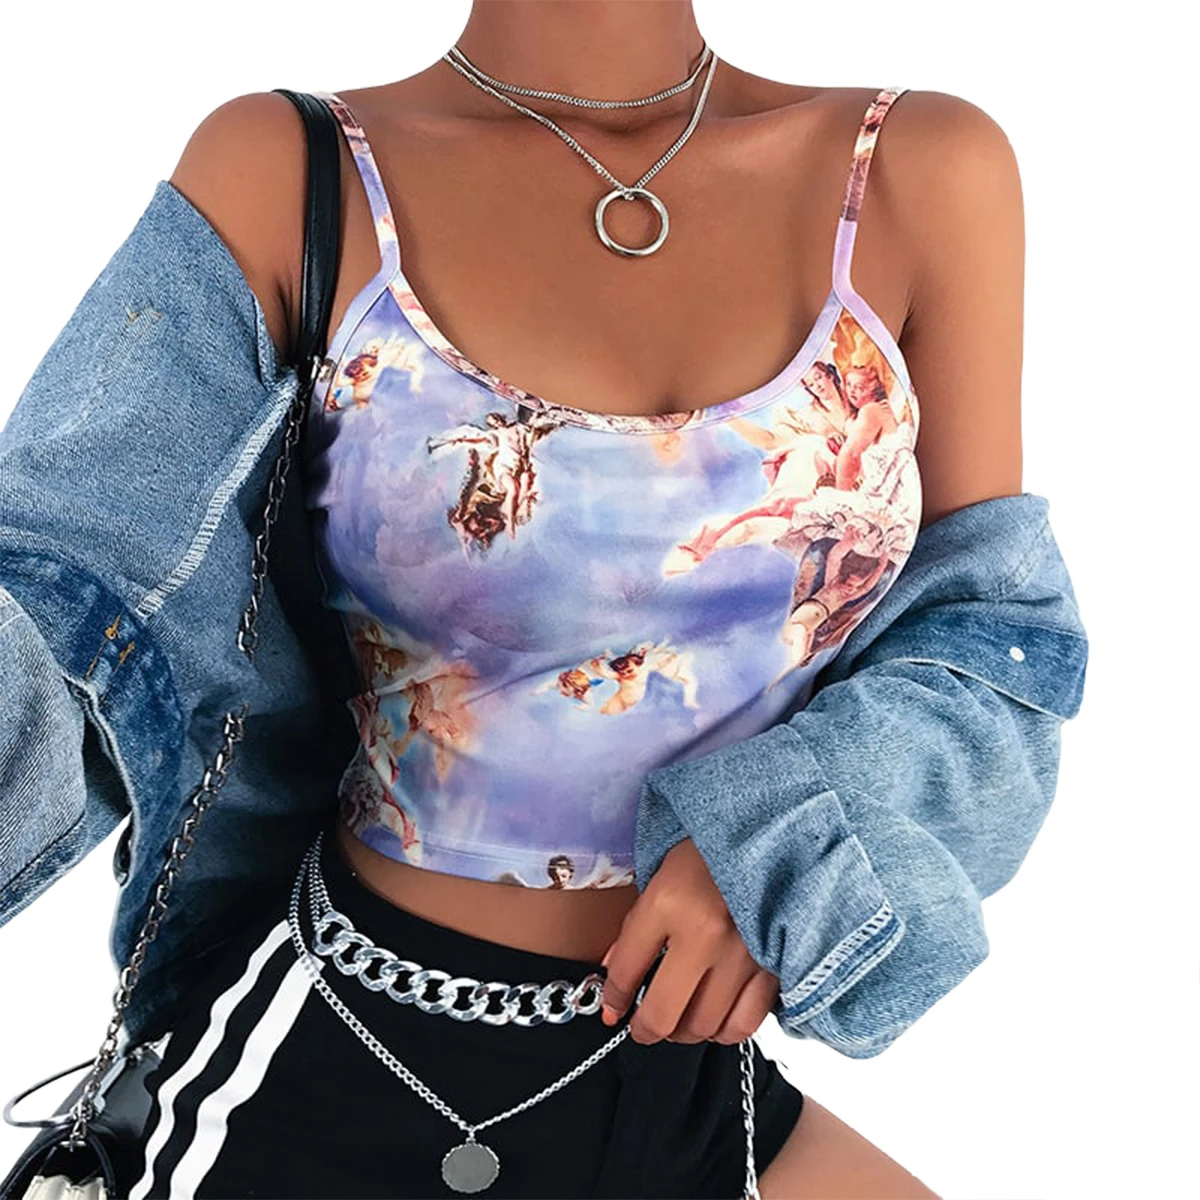 

Camisole Tops Women Sexy Print Tube Top Waist Suspender Vest Exposed Navel Casual Top Summer